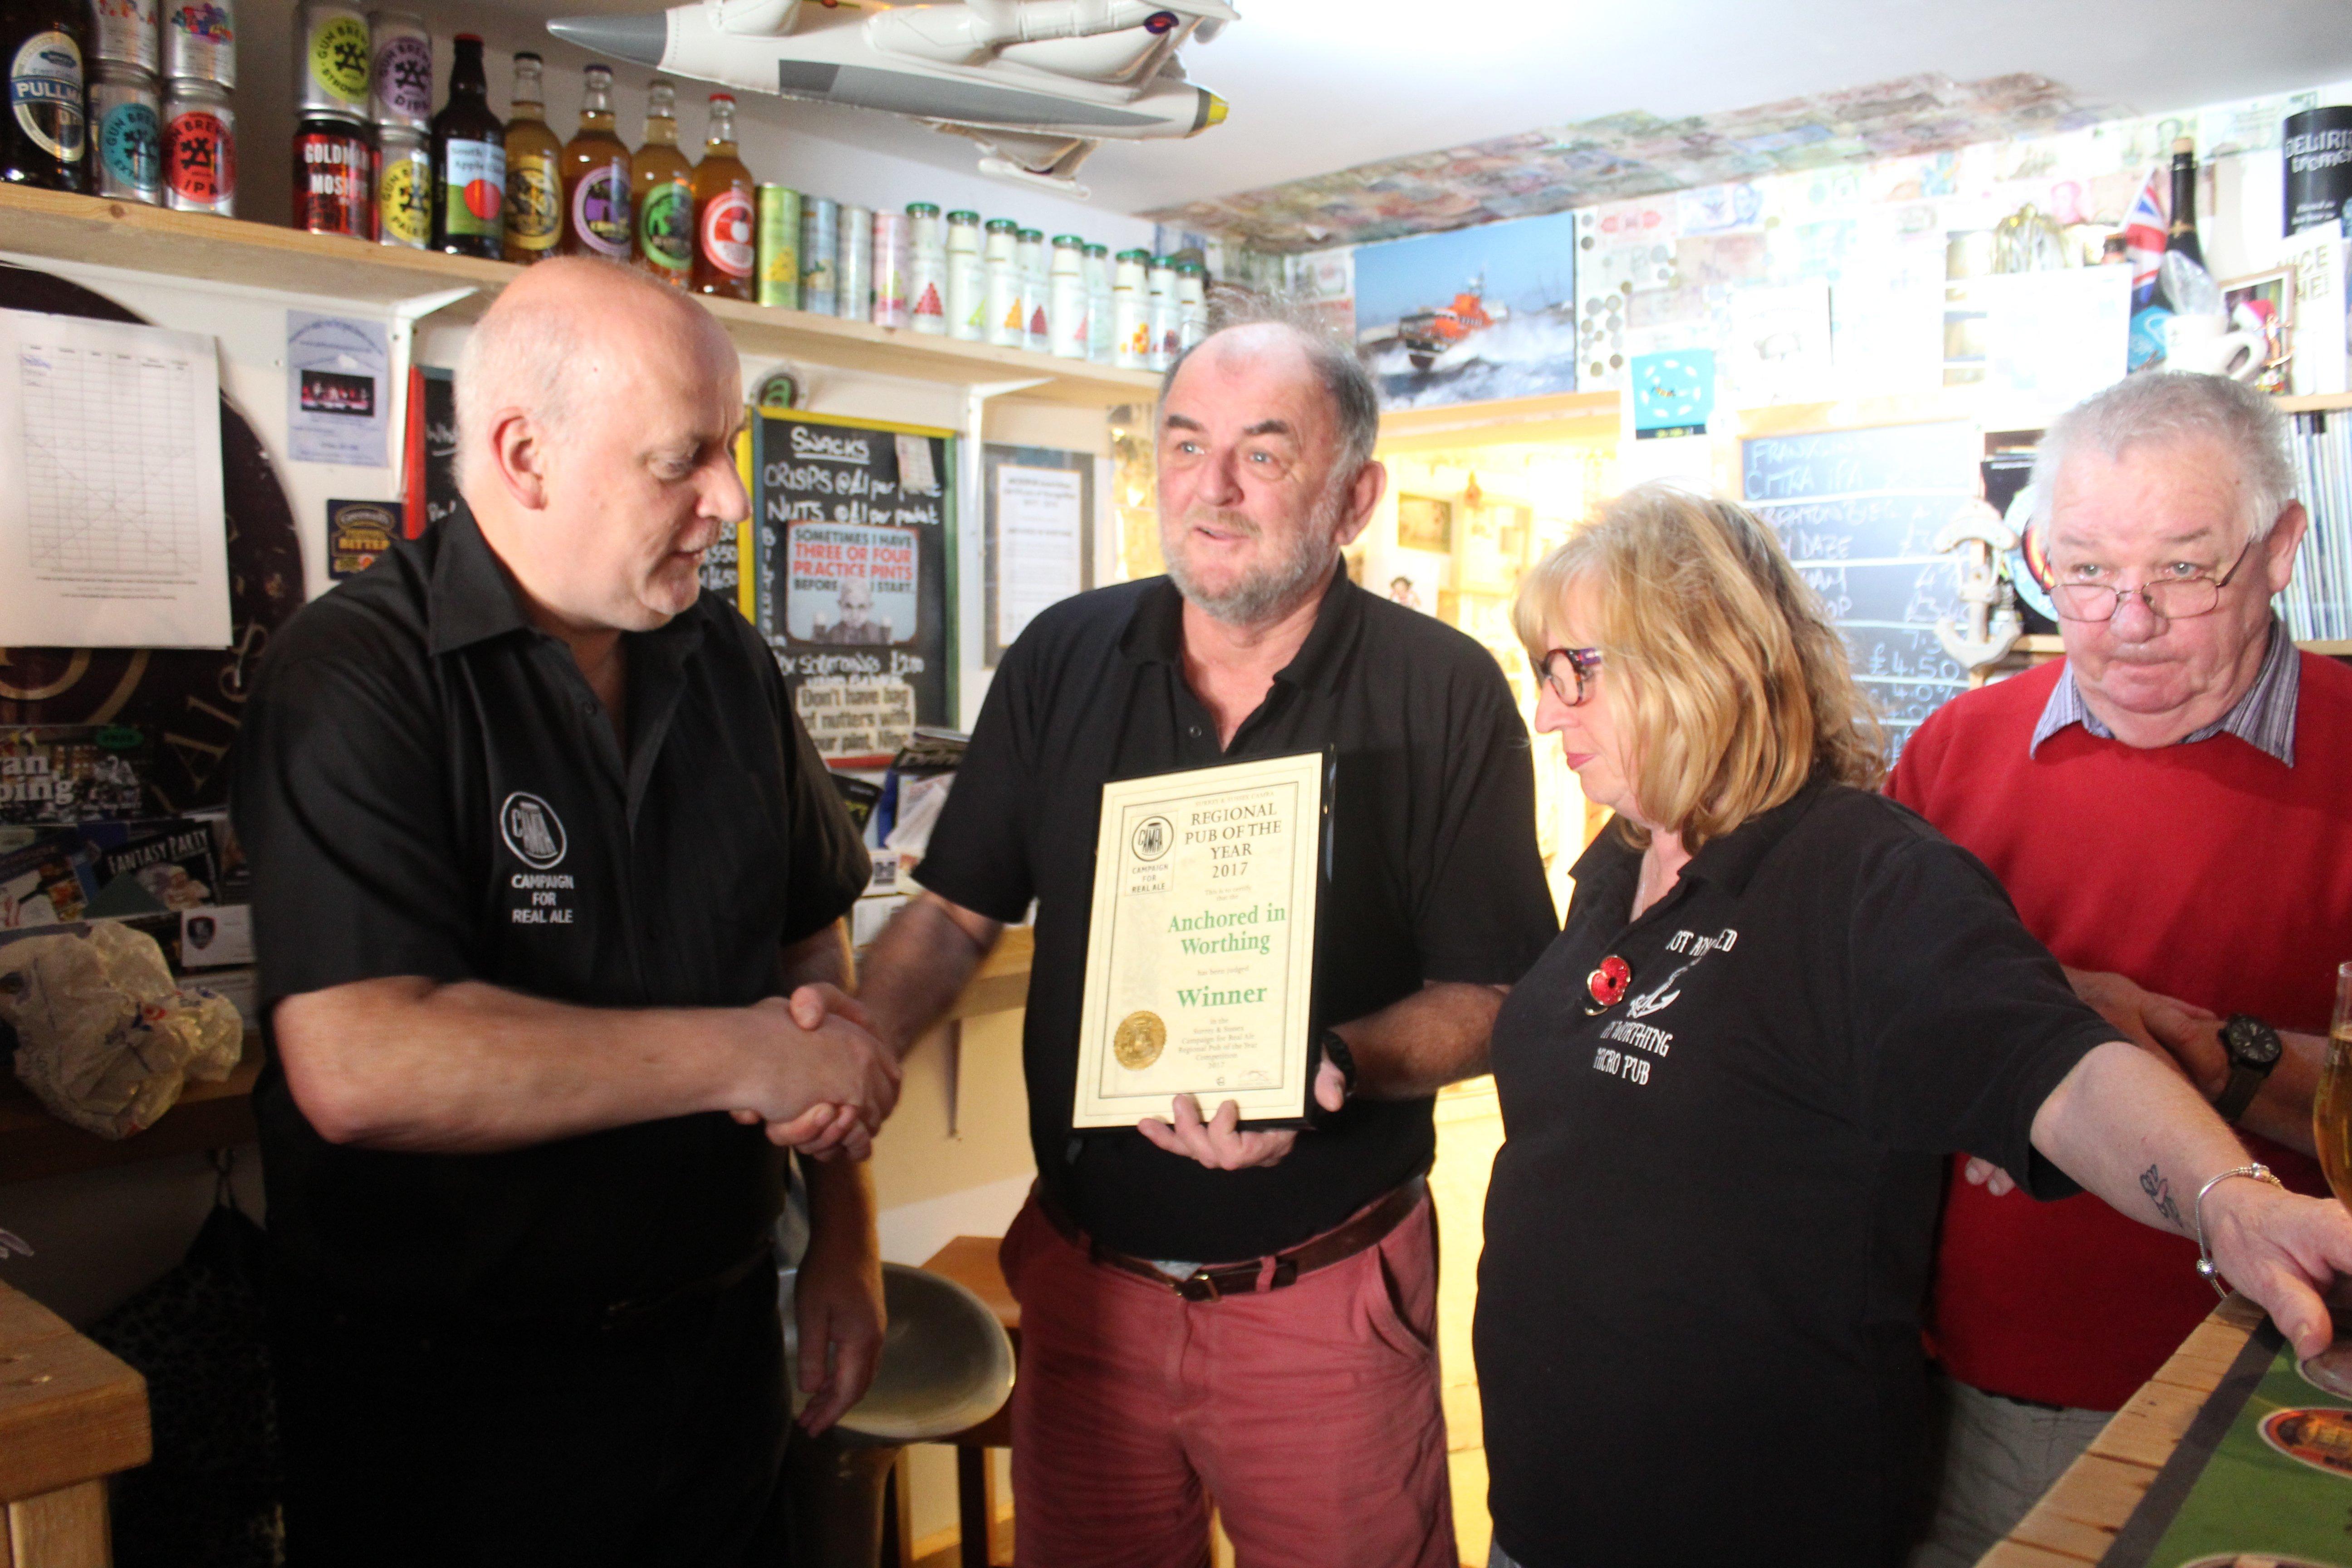 Nigel Watson and Deborah Blakely, owners of Anchored in Worthing, receiving the Campaign for Real Ale's Regional Pub of the Year 2017 award from Chris Stringer. Picture contributed.